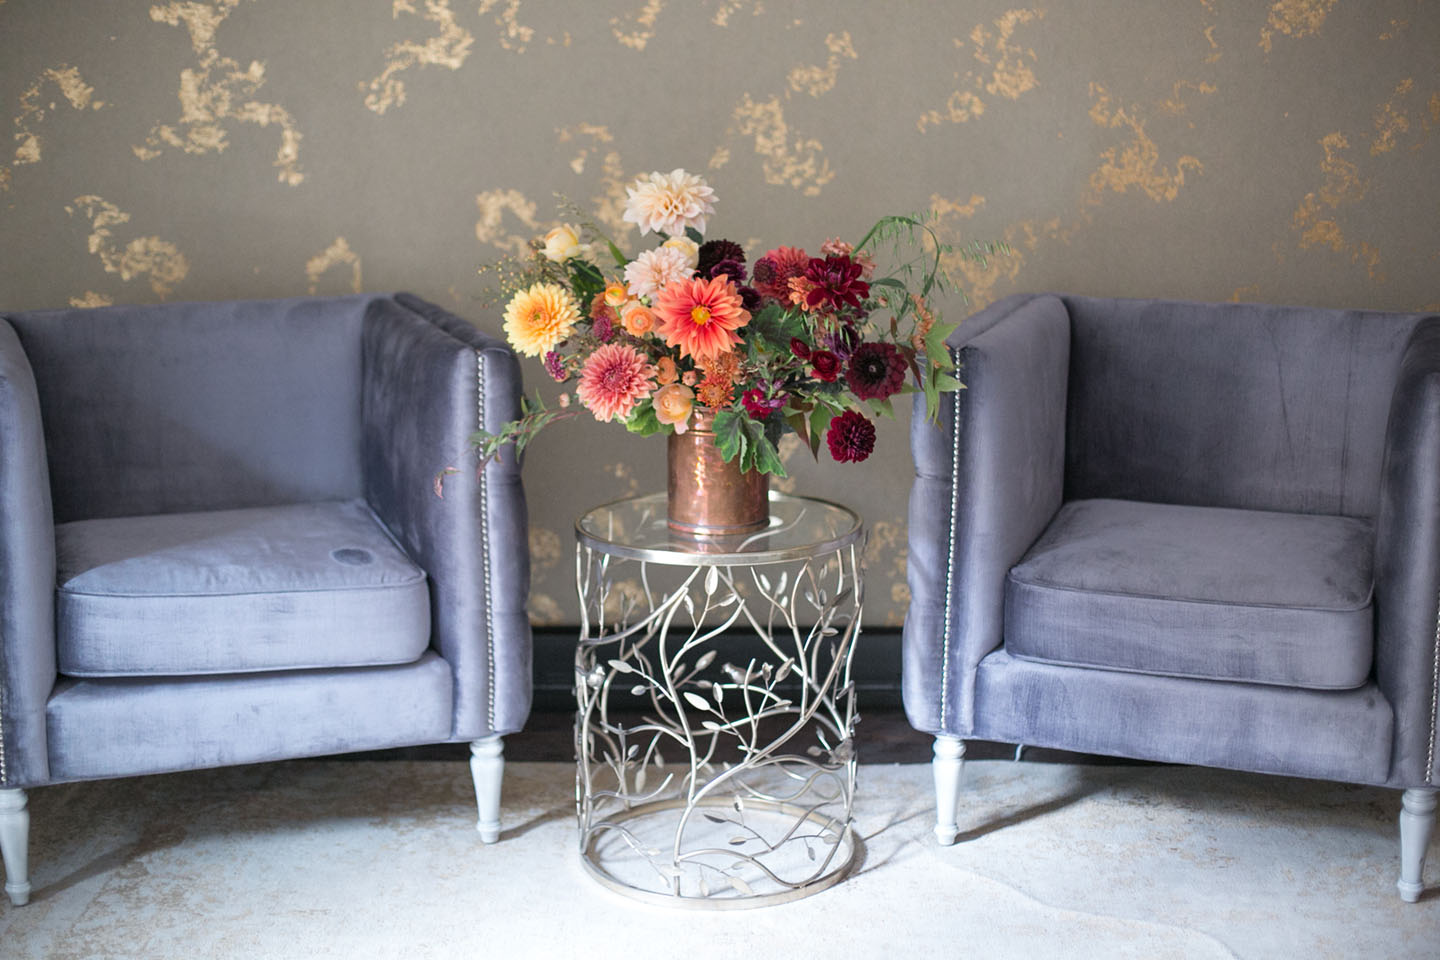 A floral arrangement in a copper vessel stands on a small metal drinks table between two blue-gray velvet, square-shaped wing chairs. The wallpaper is gray with a metallic gold marbling.